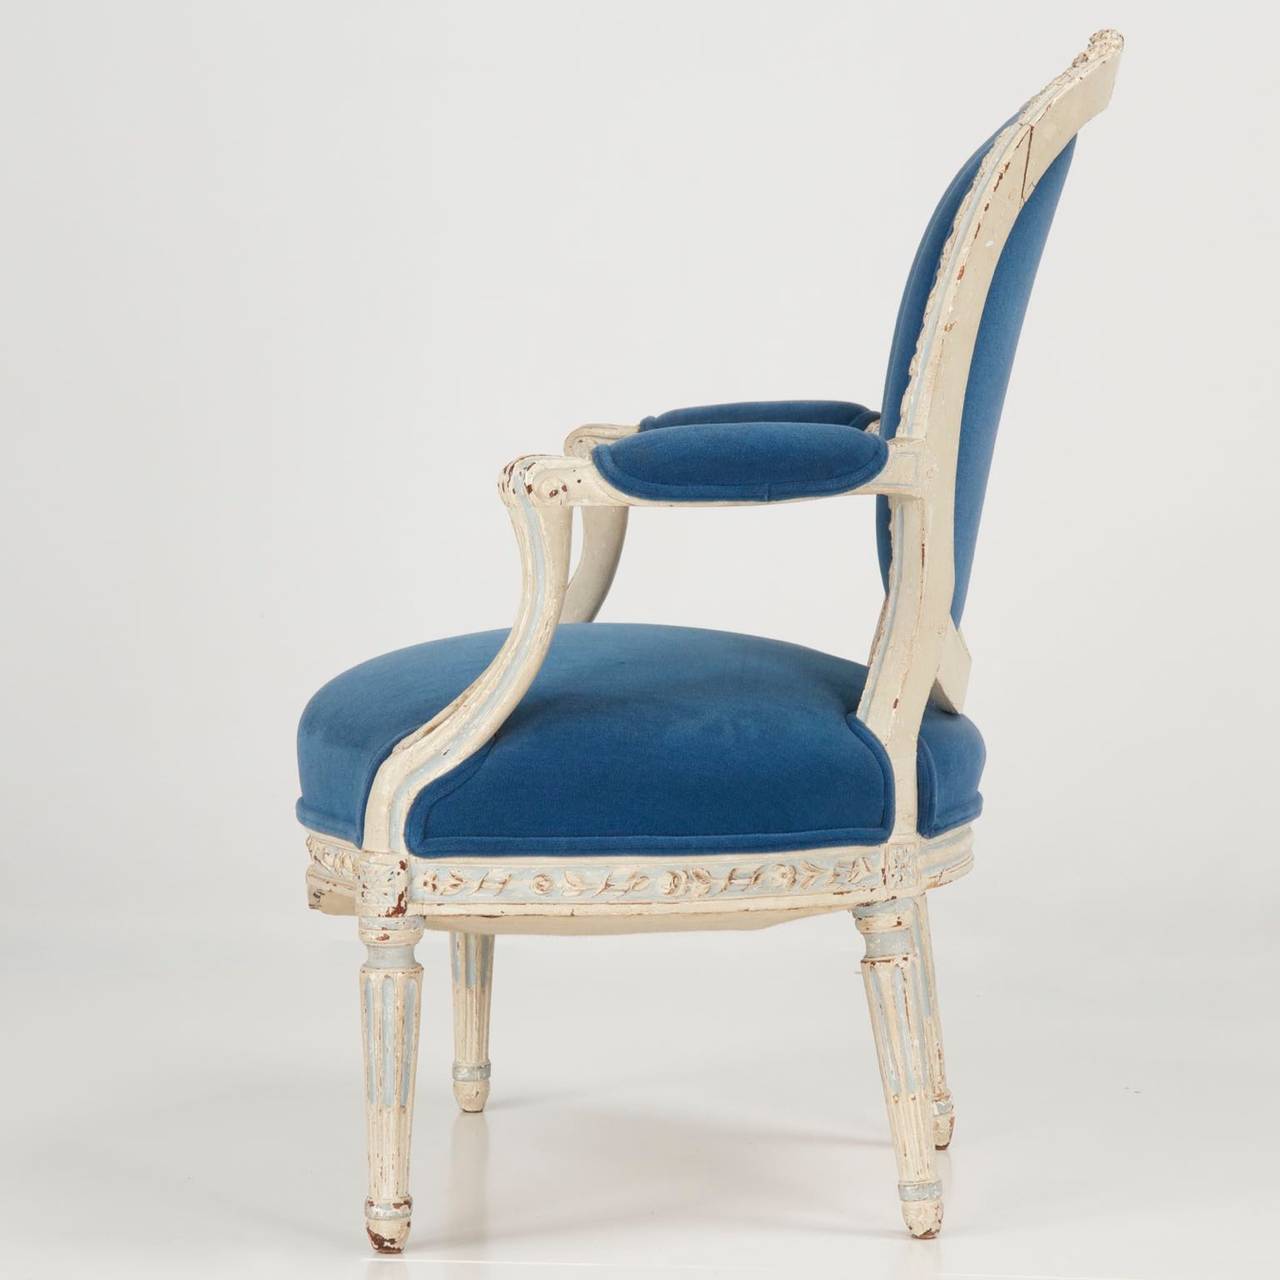 Exquisitely carved and detailed, this fine French open-arm fauteuil was clearly crafted by a fluent and creative hand.  The crest rail culminates from the rather varied rail molding in a robust display of flowers carved from the solid rail.  Each